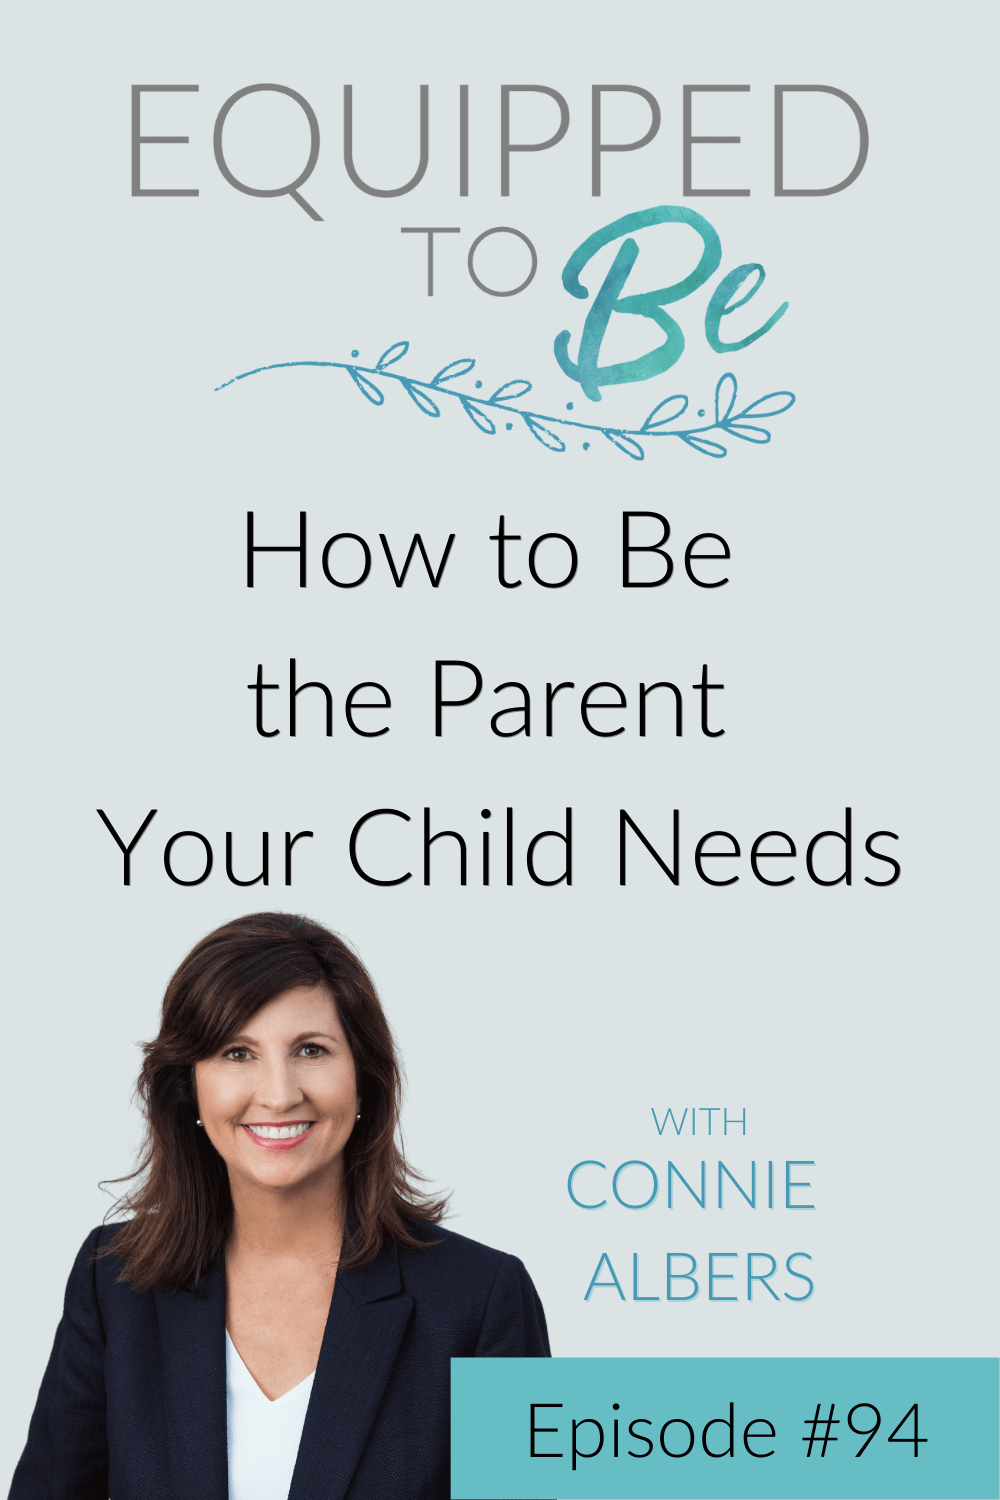 How to Be the Parent Your Child Needs - ETB #94